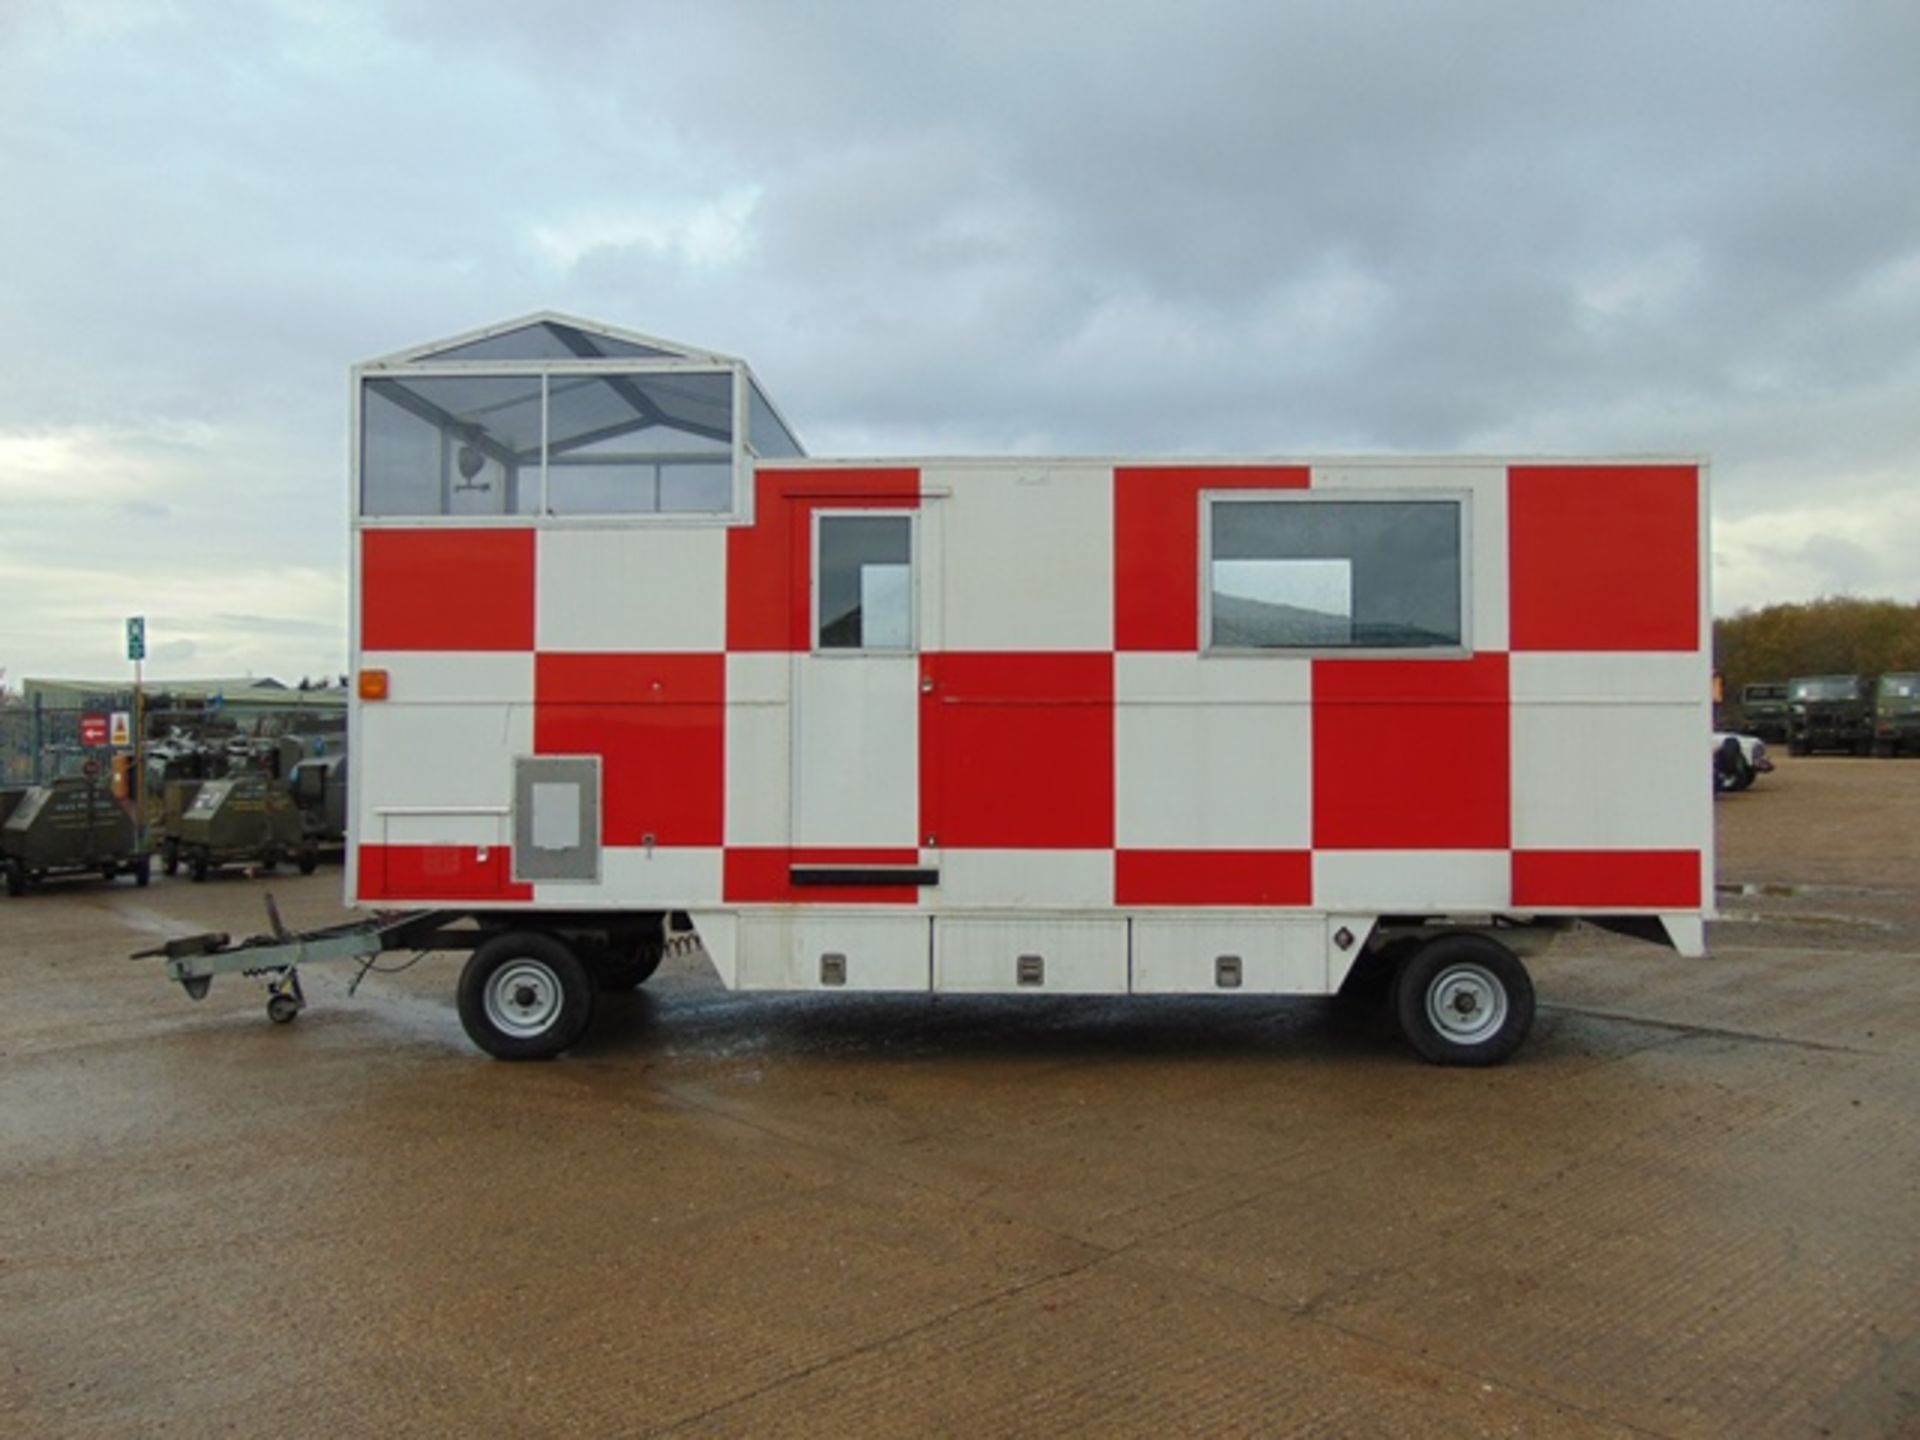 Royal Air Force Mobile Observation and Command Centre - Image 5 of 27